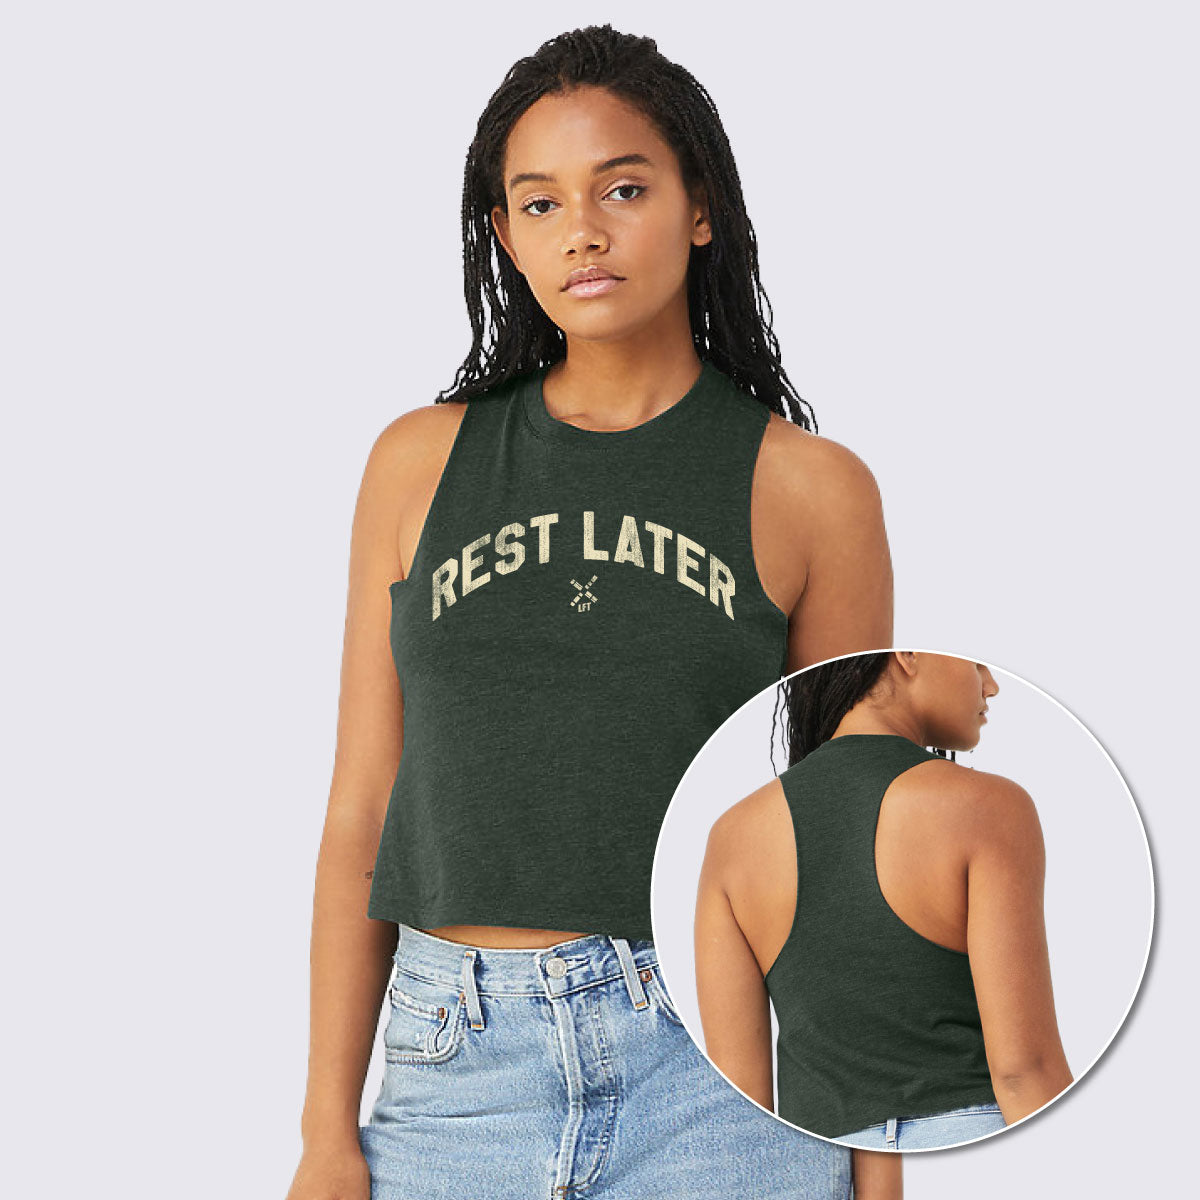 Rest Later Racerback Crop Tank - The LFT Clothing Company